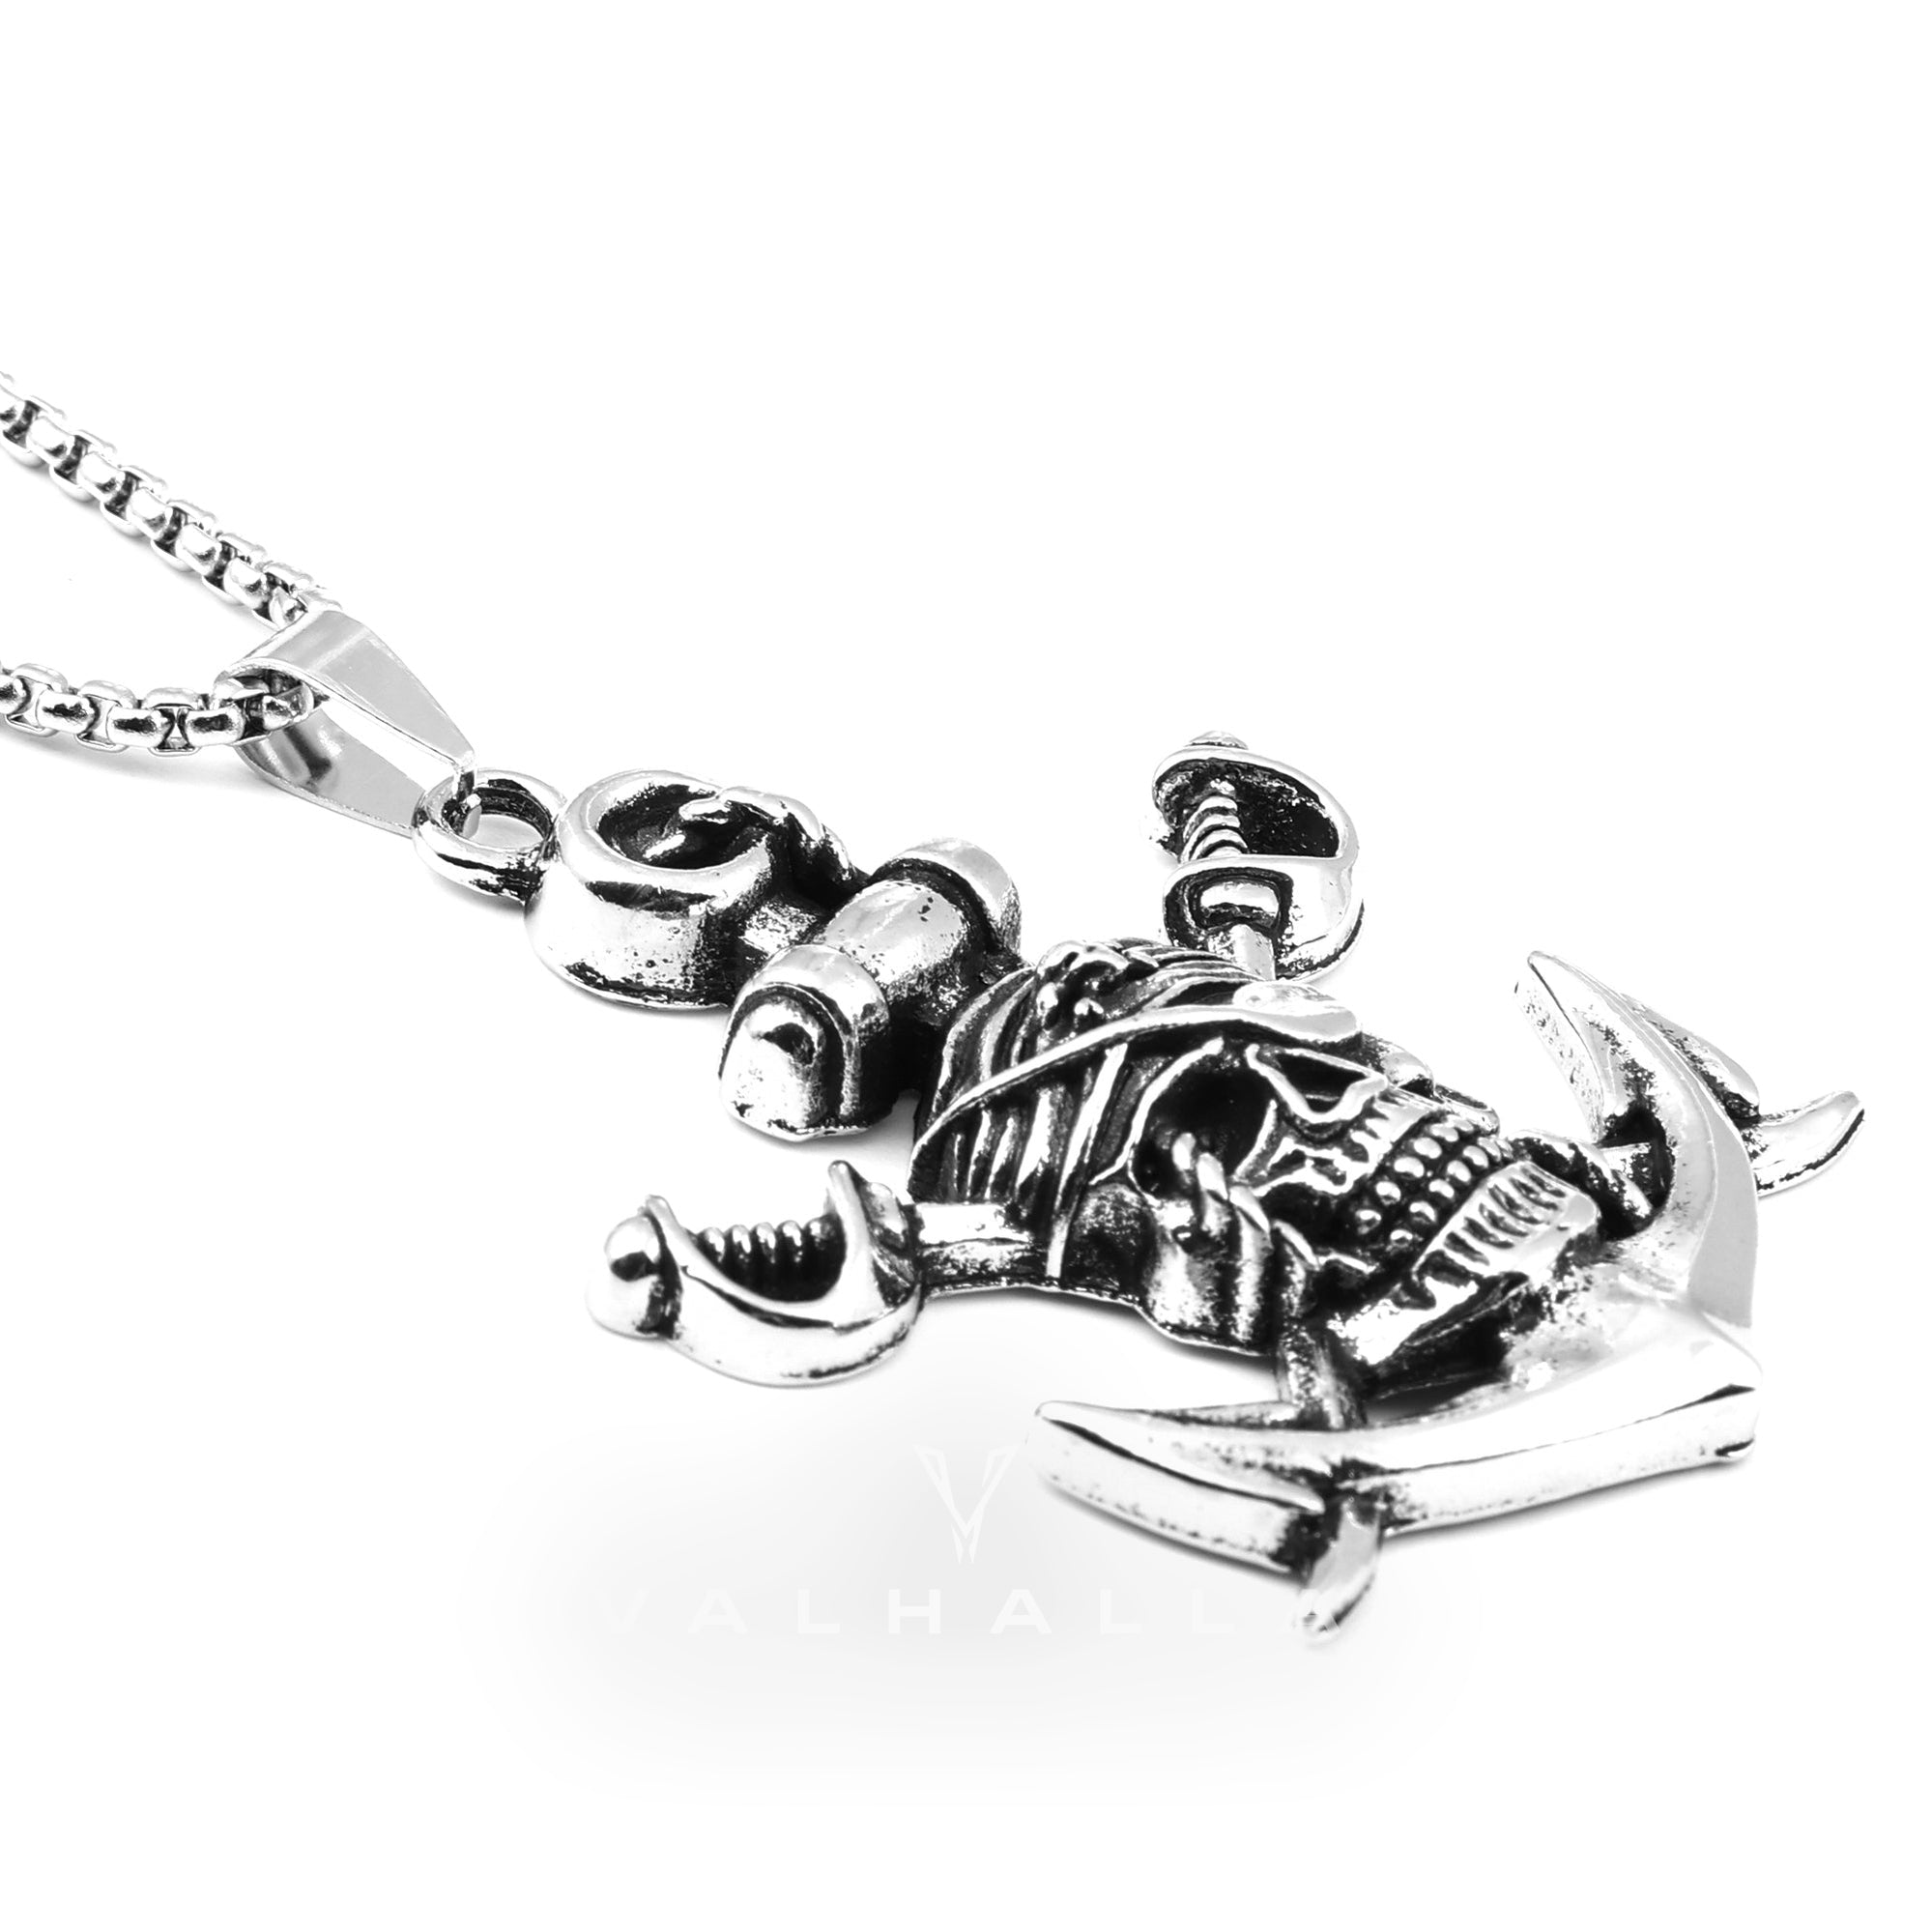 Death Pirate Stainless Steel Pendant & Chain